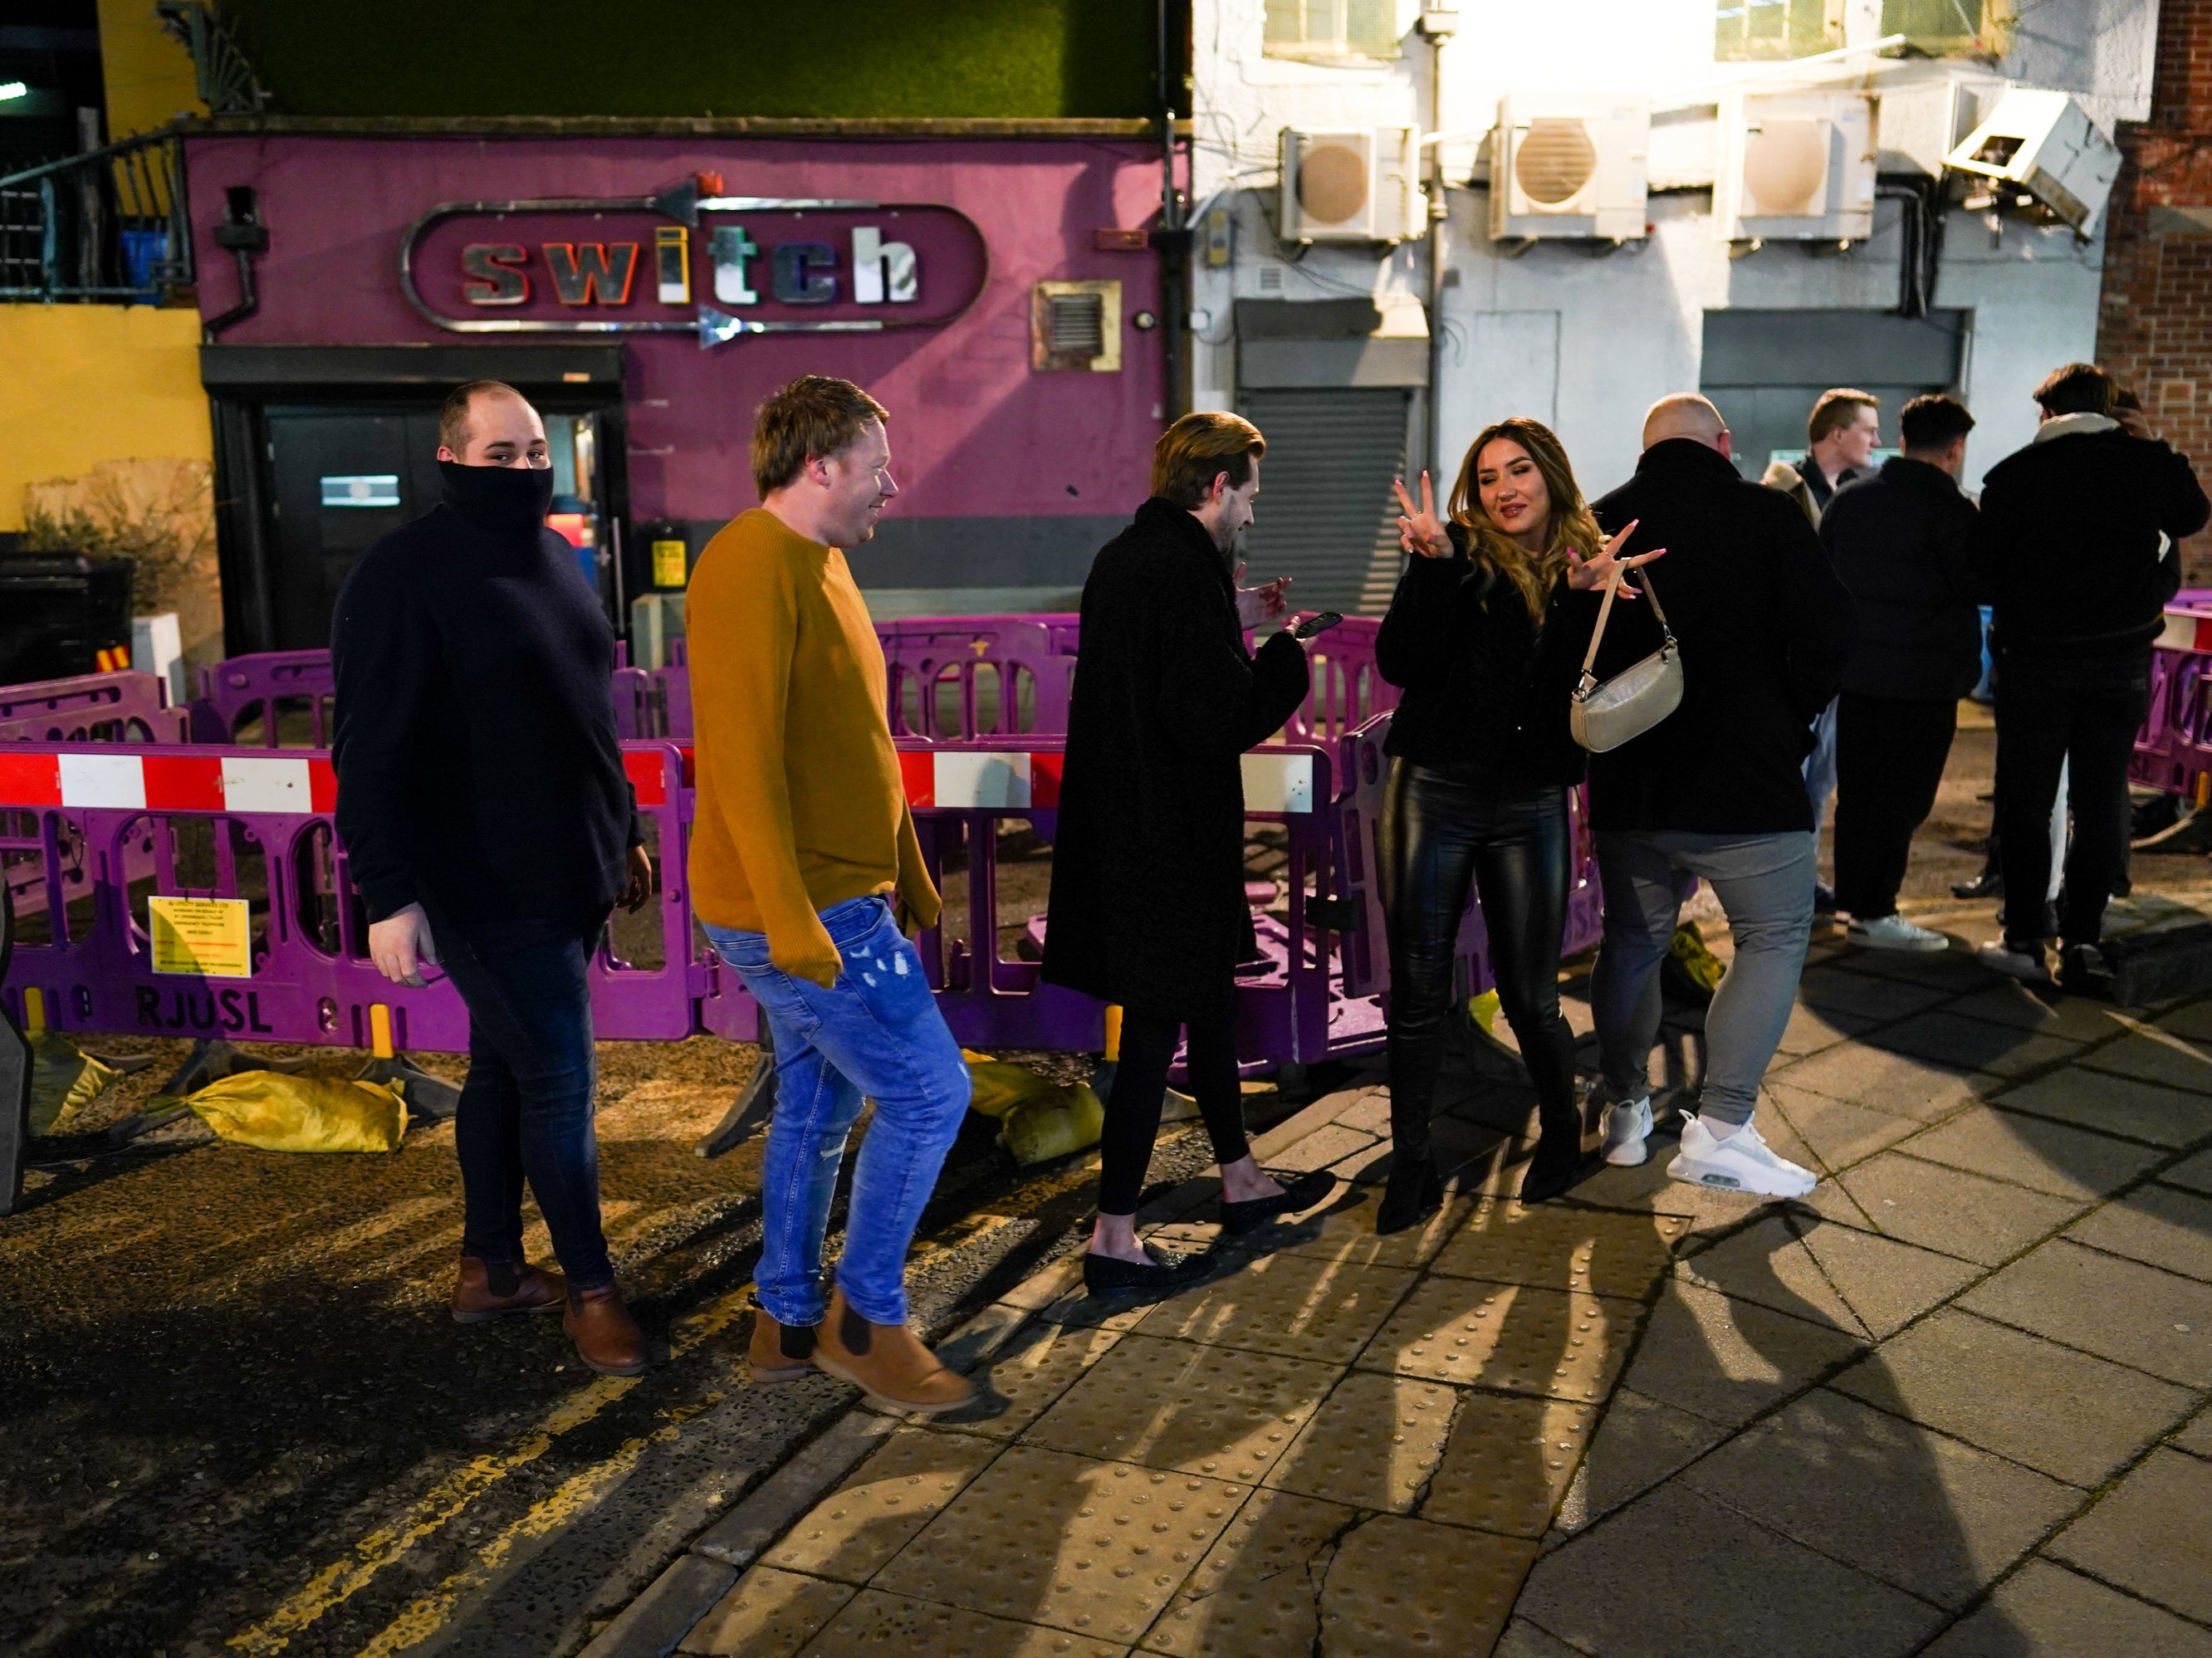 Customers wait outside the Switch bar in Newcastle as it prepares to serve customers after midnight to mark the latest lifting of lockdown measures